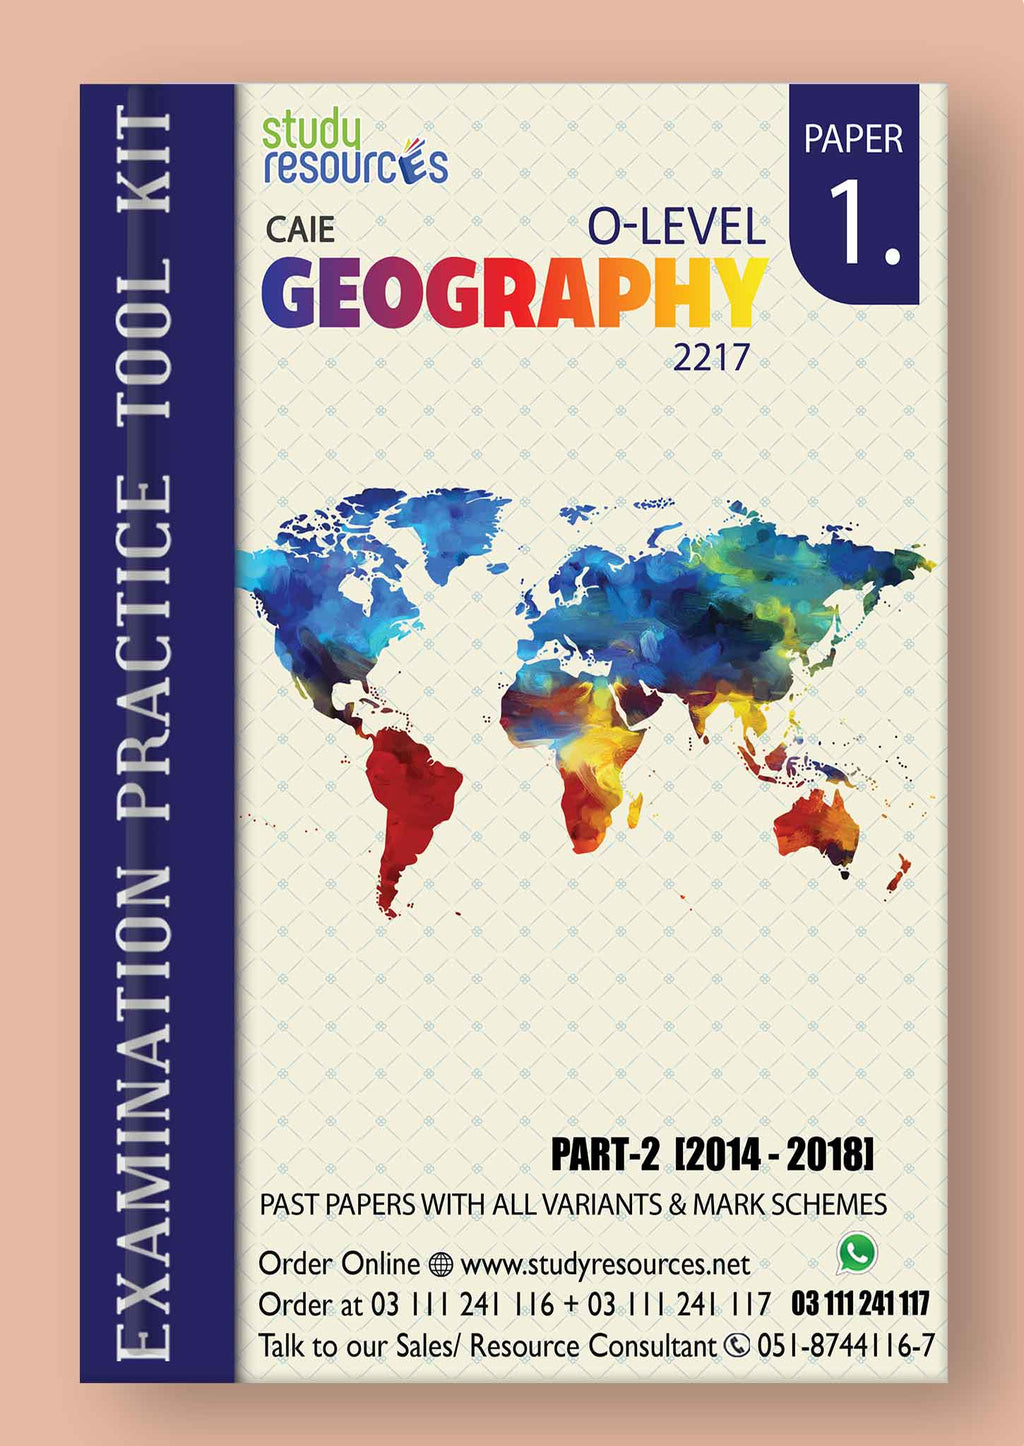 Cambridge O-Level Geography (2217) P-1 Past Papers Part-2 (2014-2018)